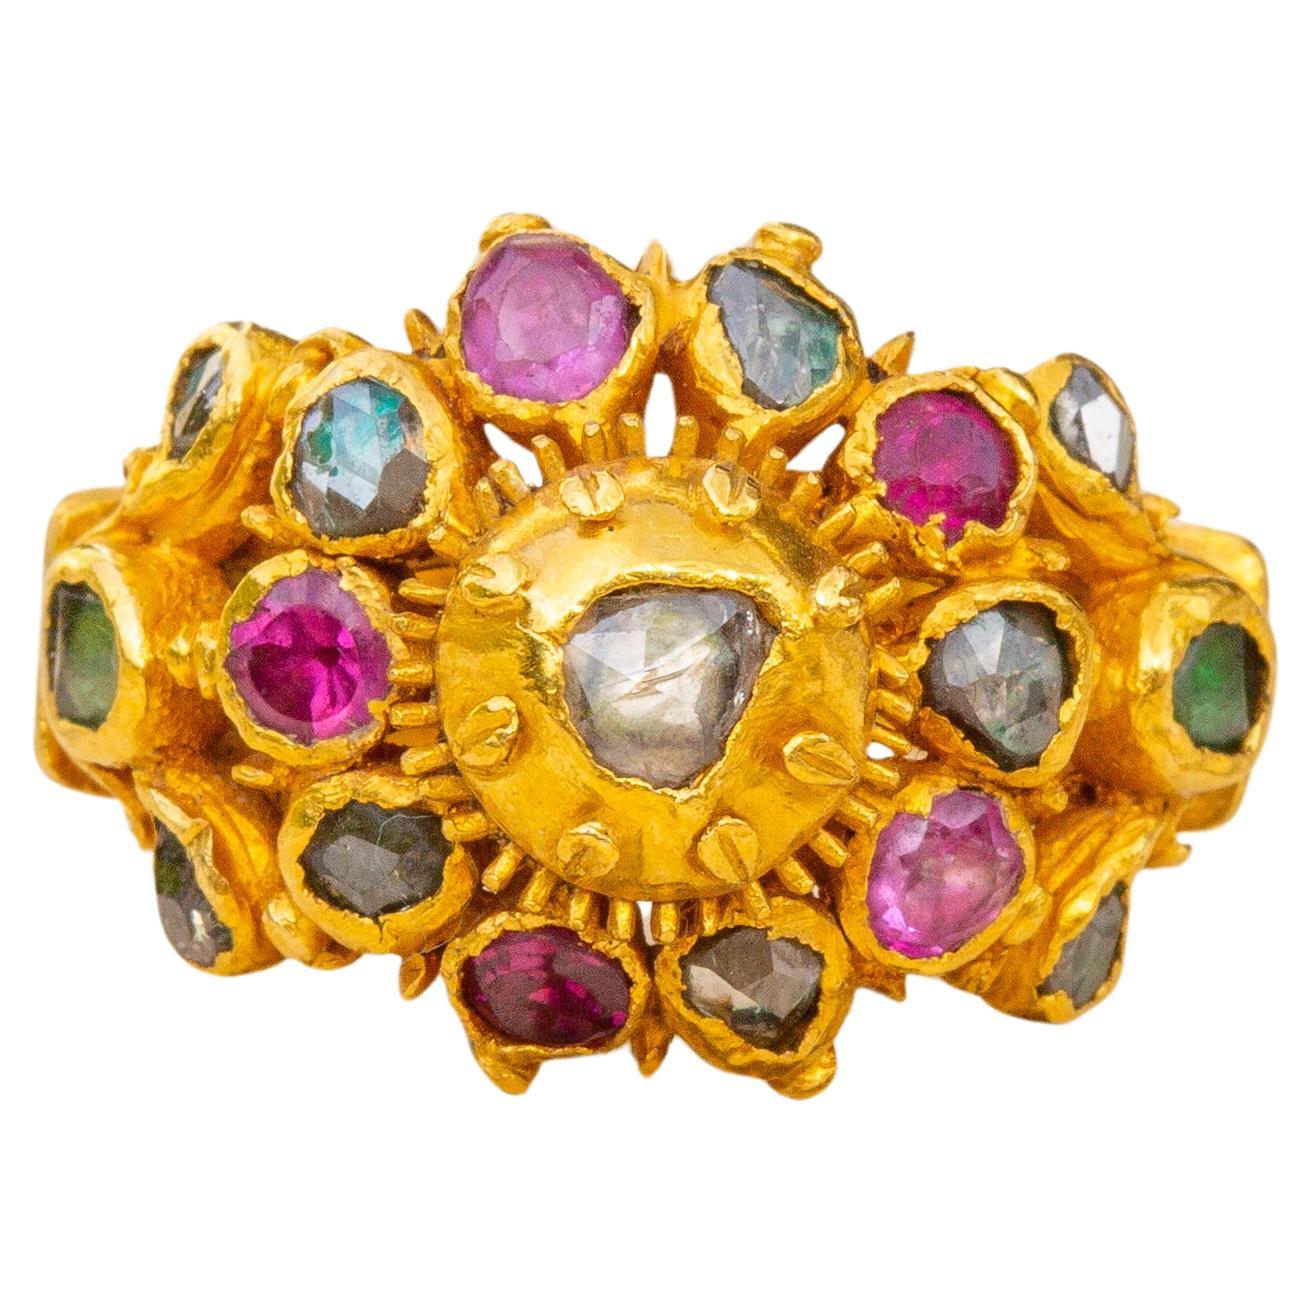 Antique Thai Siam 19th Century Gold Princely Gem-Set Cluster Ring Ruby Emerald